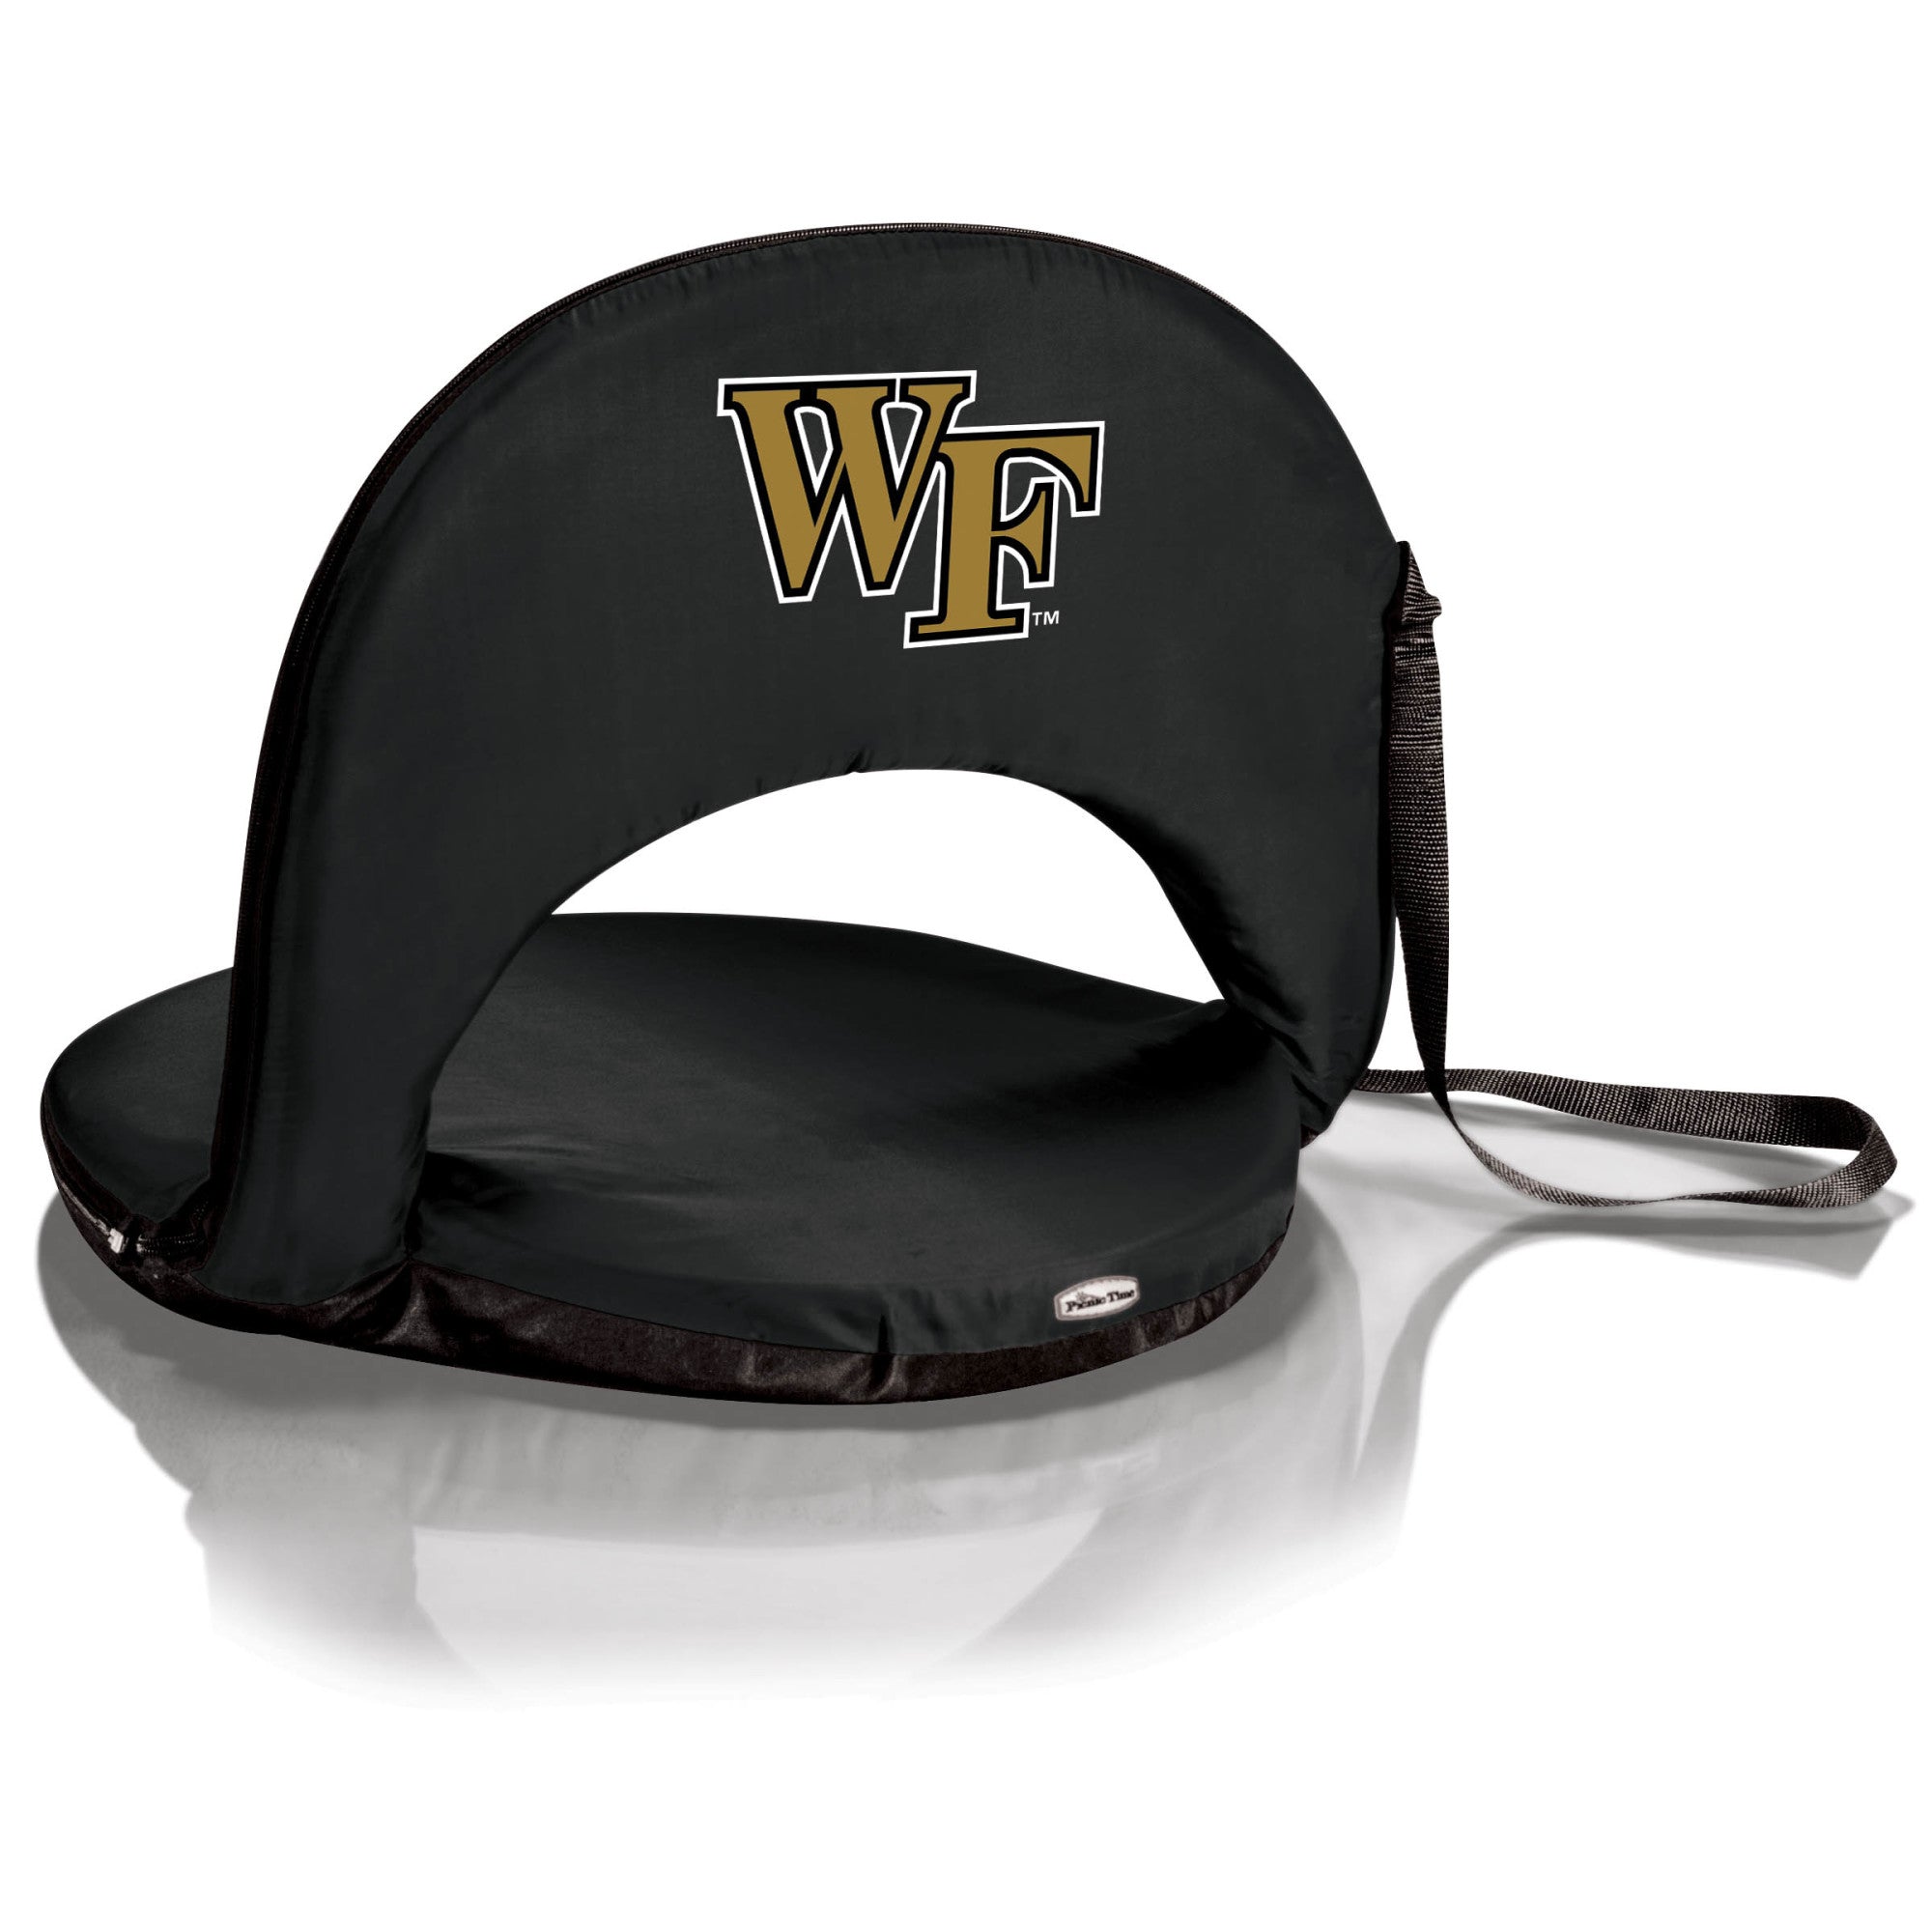 Wake Forest Demon Deacons - Oniva Portable Reclining Seat, (Black)